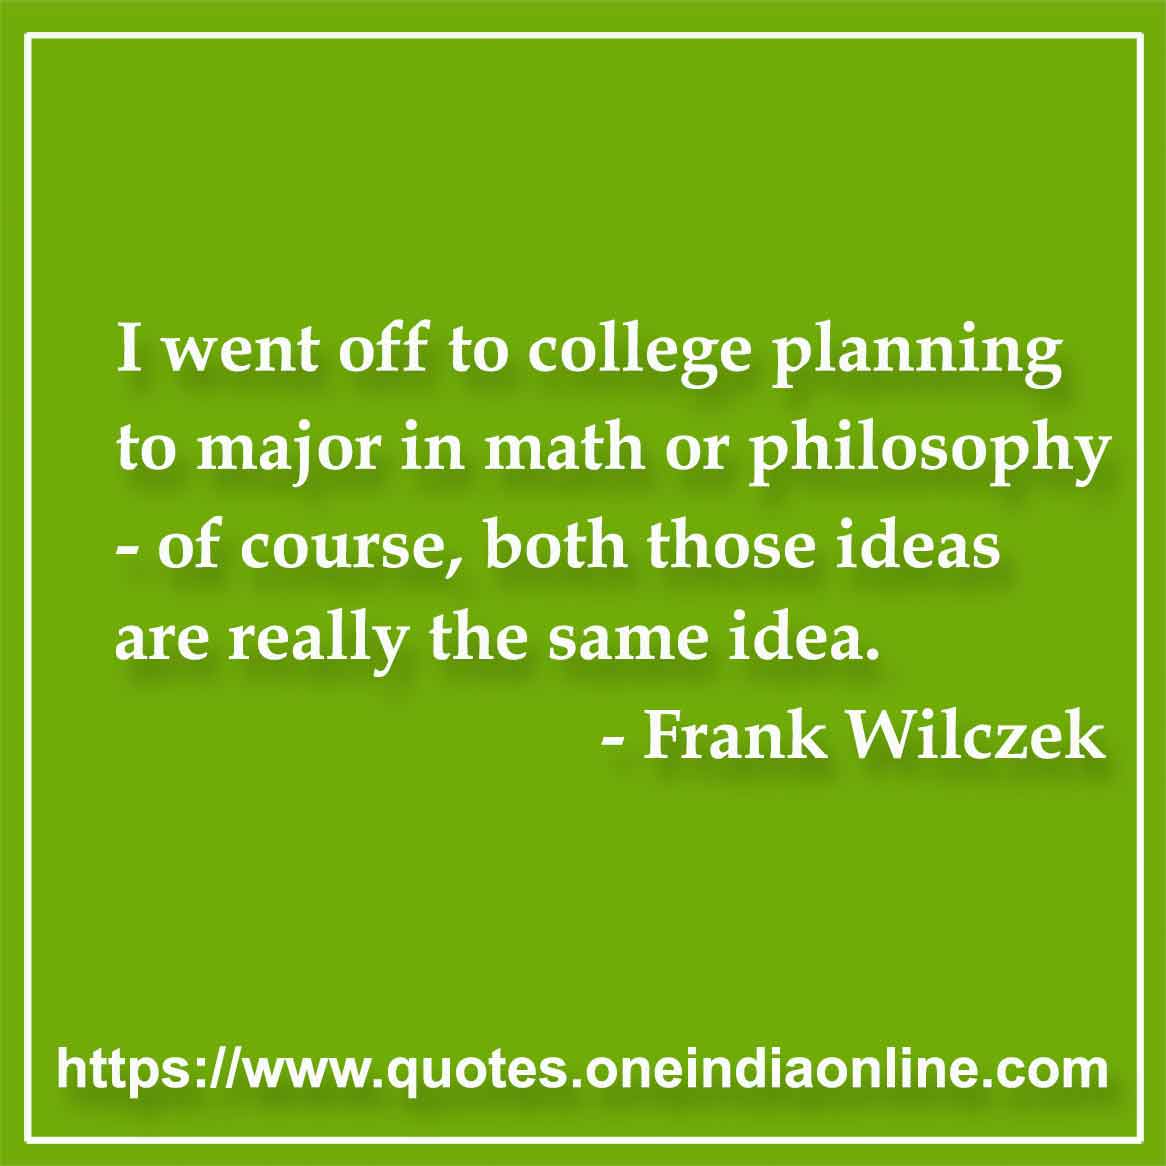 I went off to college planning to major in math or philosophy - of course, both those ideas are really the same idea.

- Mathematics Quotes by Frank Wilczek 